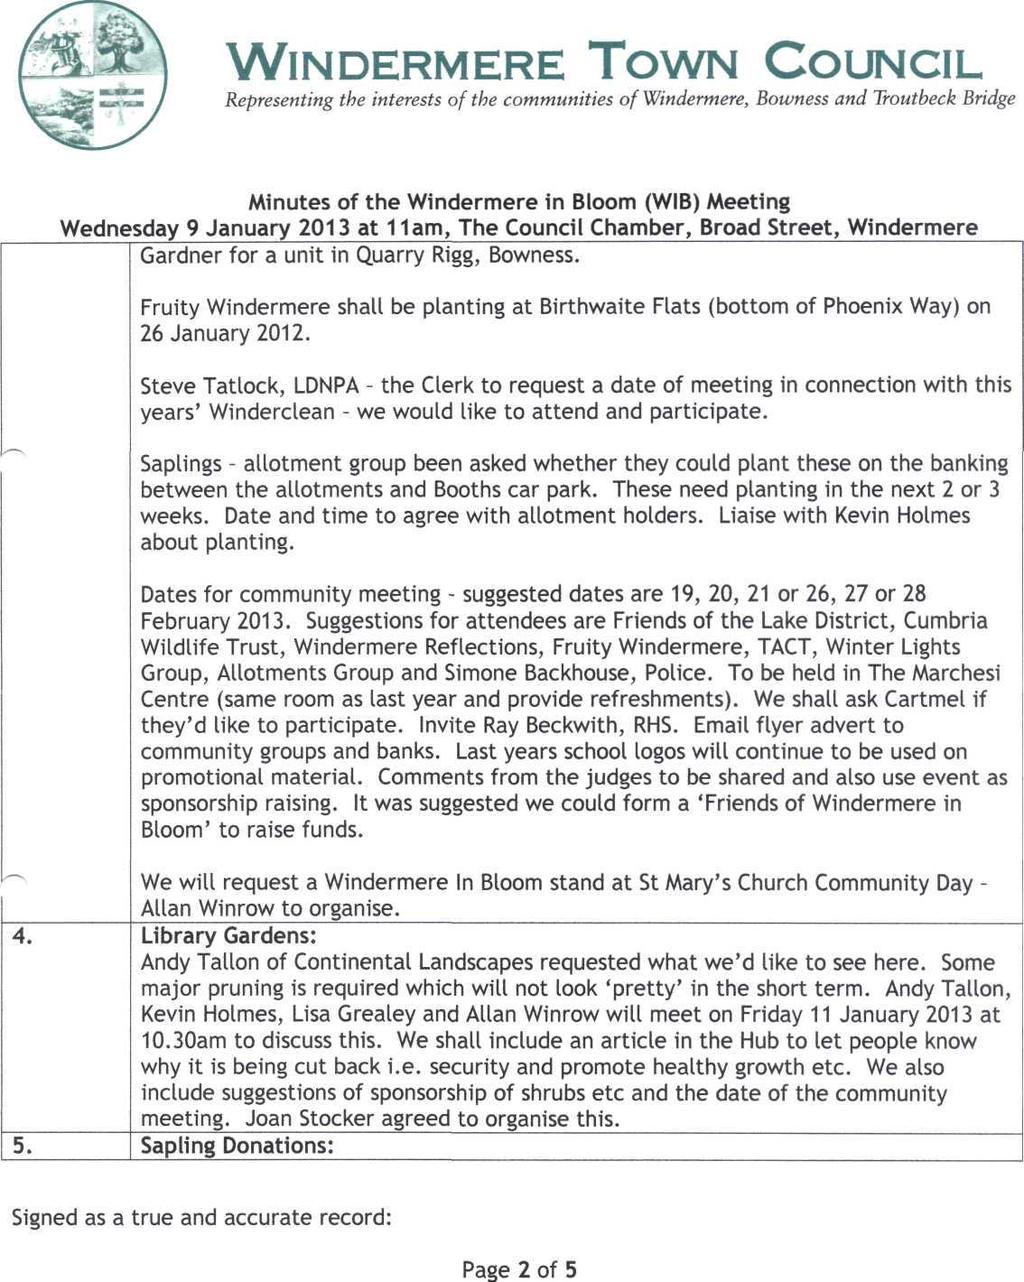 Page 2 of 5 WlNDERMERE TOWN COUNCIL Wednesday 9 January 2013 at 11am, The Council Chamber, Broad Street, Windermere Gardner for a unit in Quarry Rigg, Bowness.